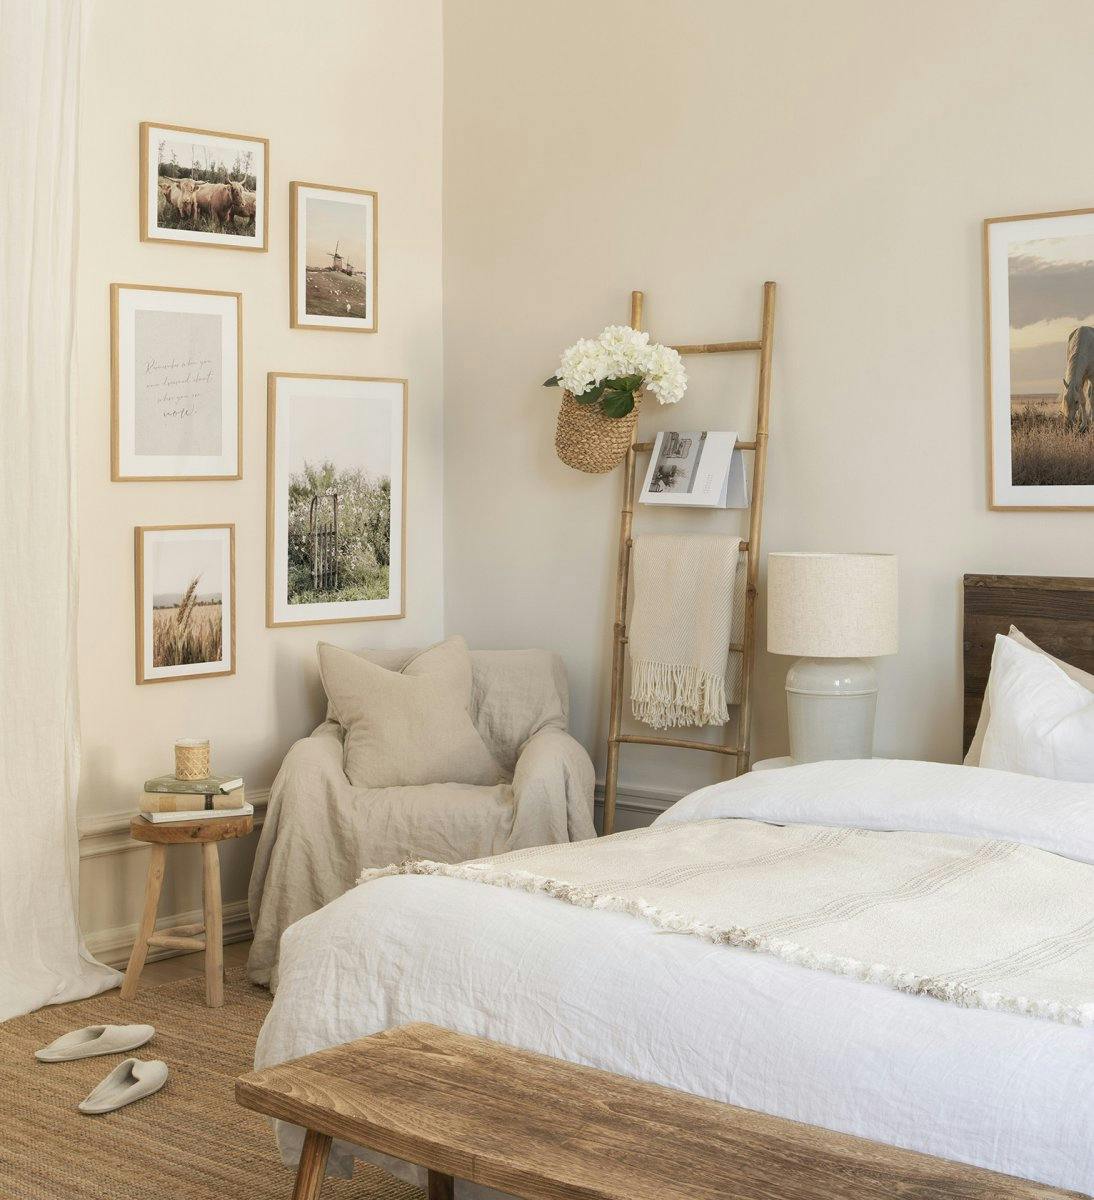 Soft gallery wall with nature posters in brown and beige with oak frames for bedroom